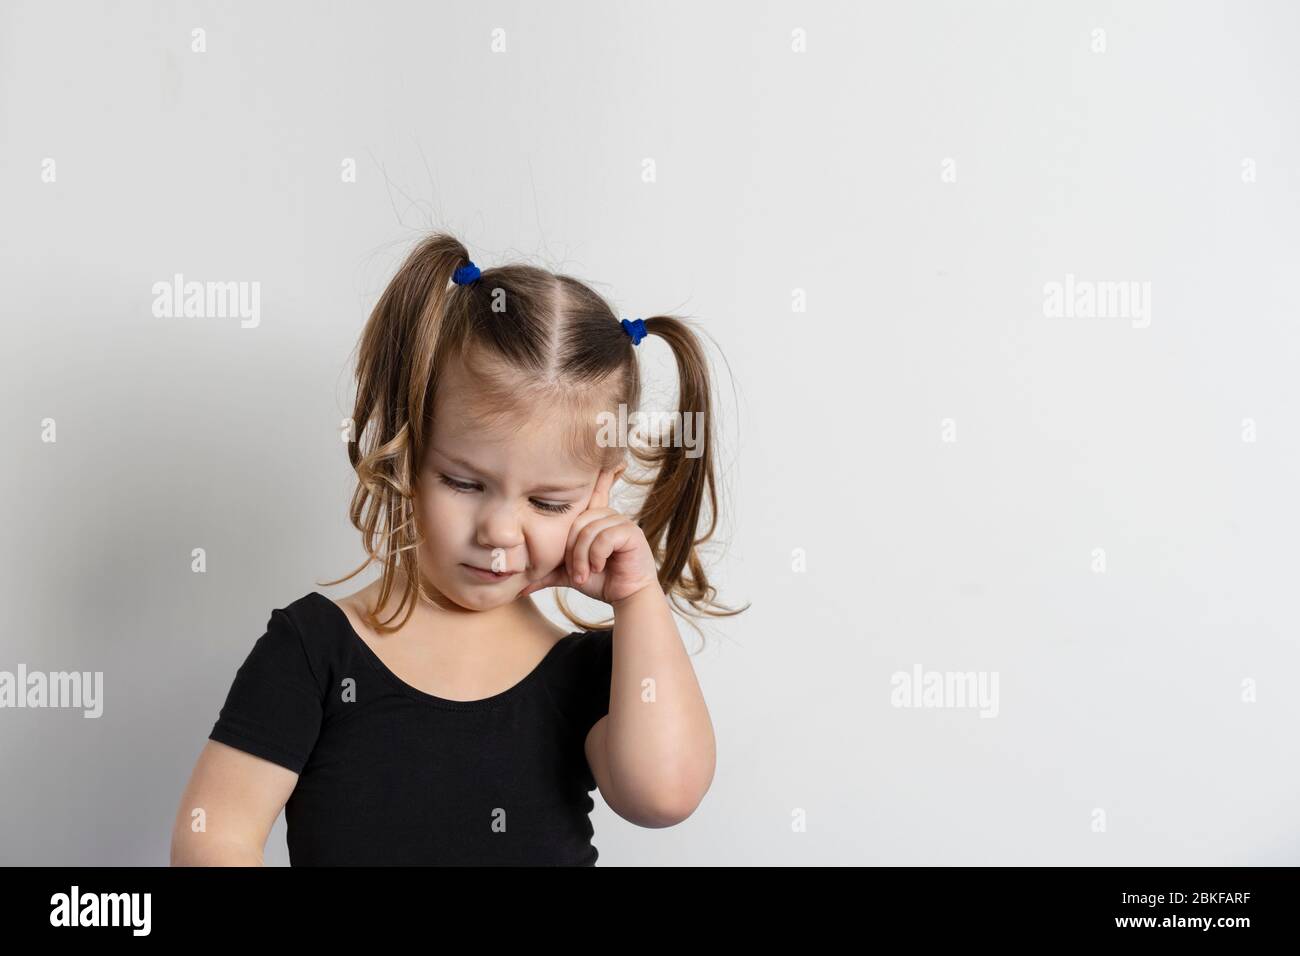 pretty little girl with two ponytails is standing in a pensive pose on a light background. Stock Photo